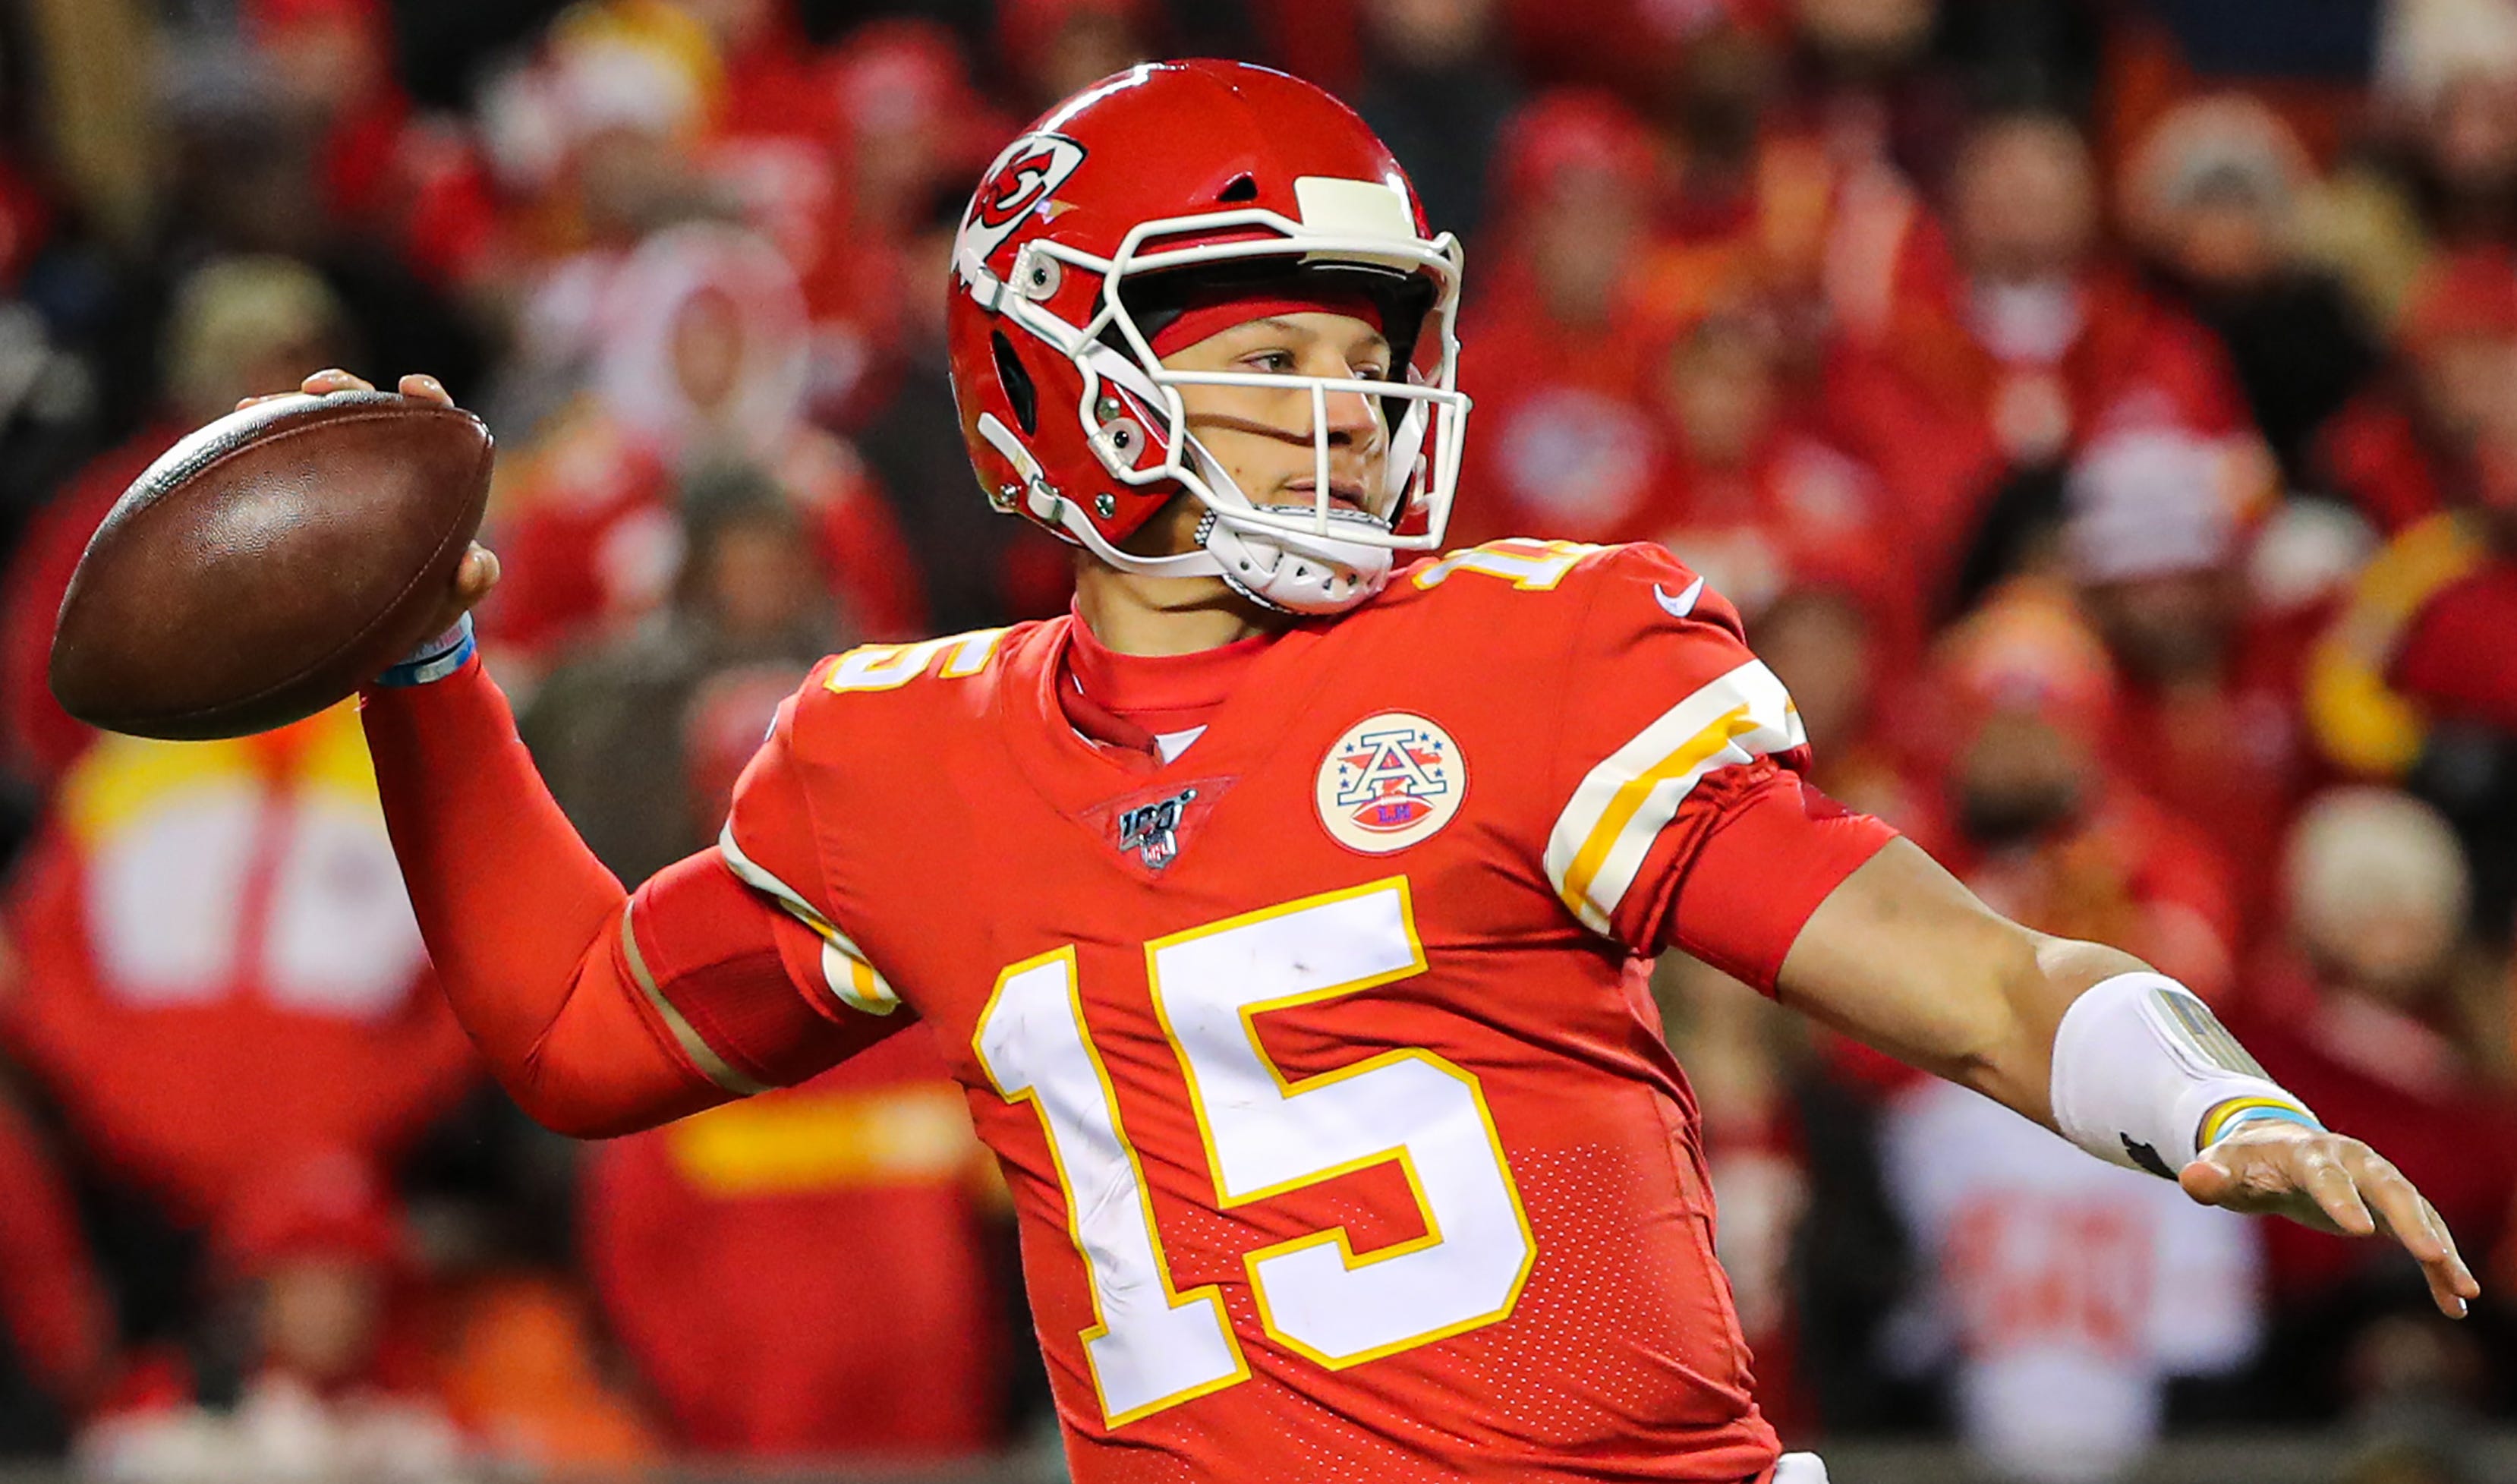 QB Patrick Mahomes break NFL record for most passing yards through 50 games